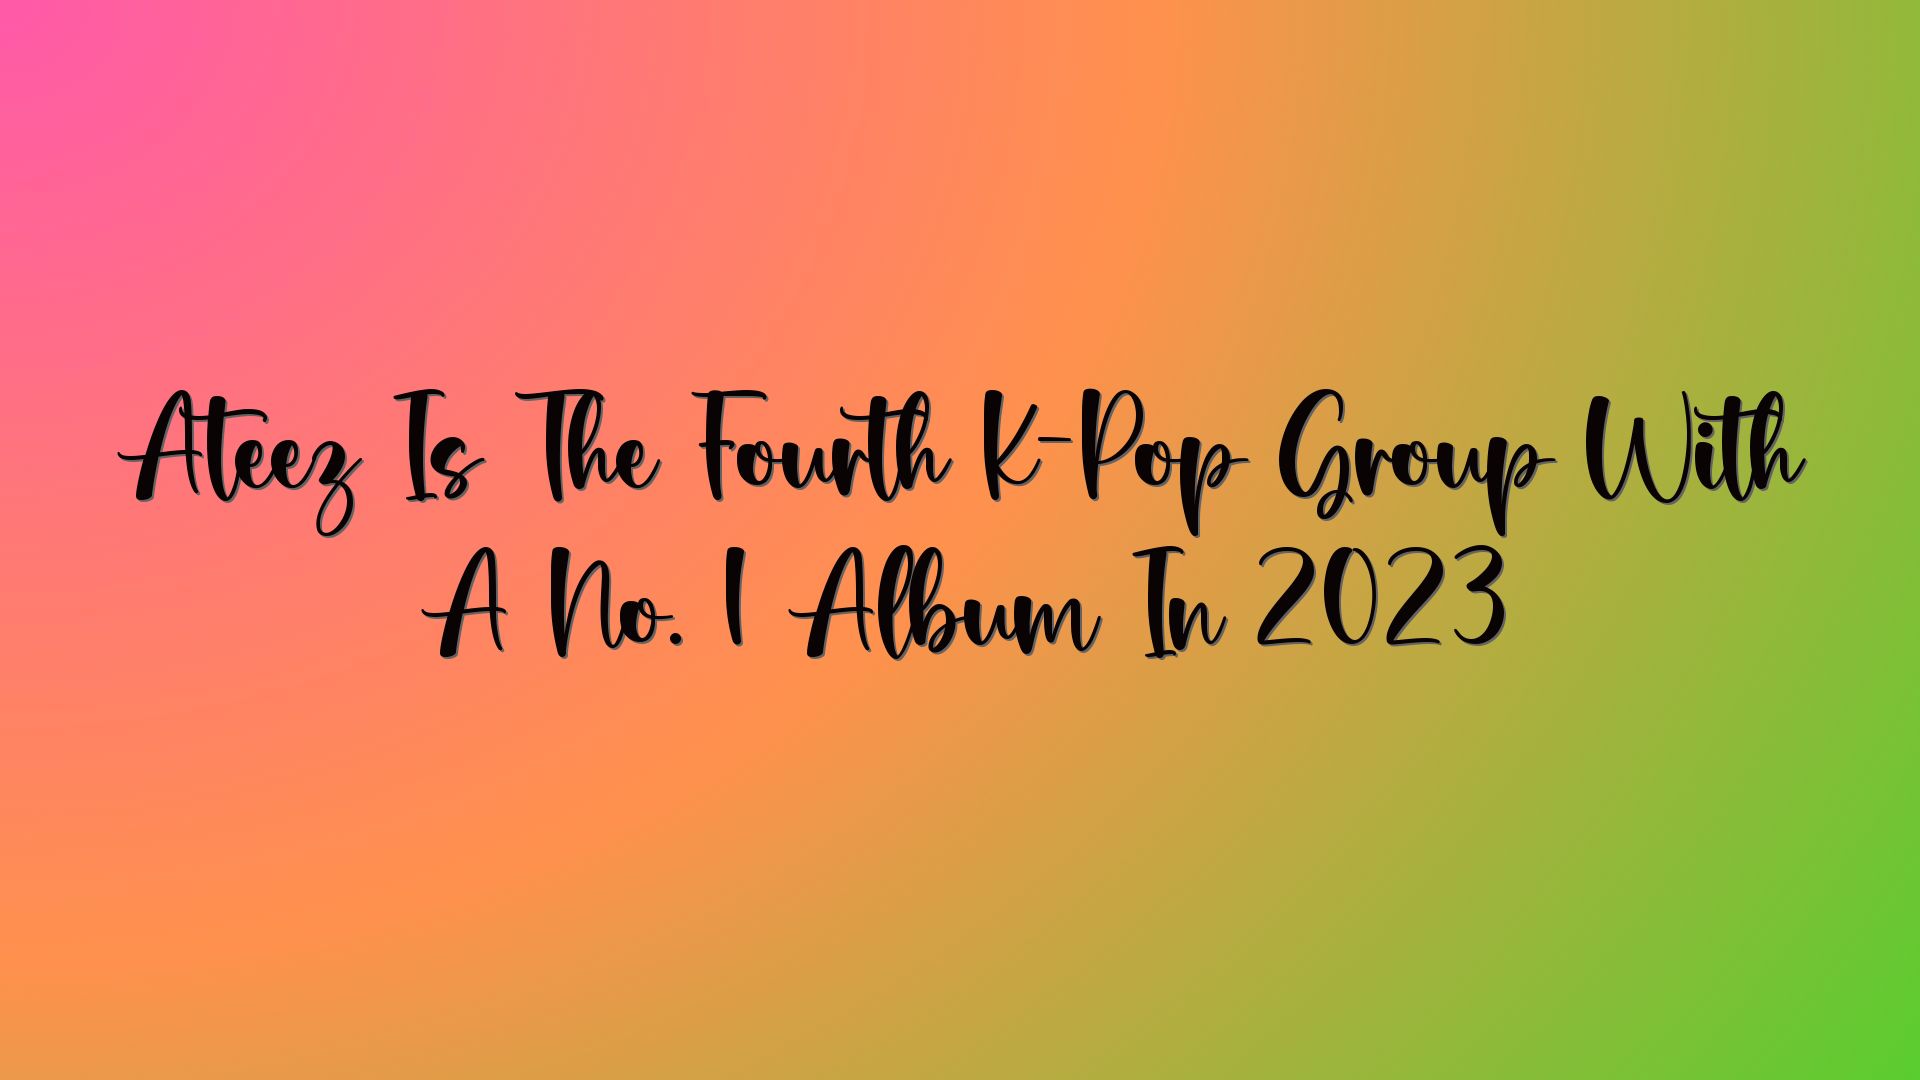 Ateez Is The Fourth K-Pop Group With A No. 1 Album In 2023